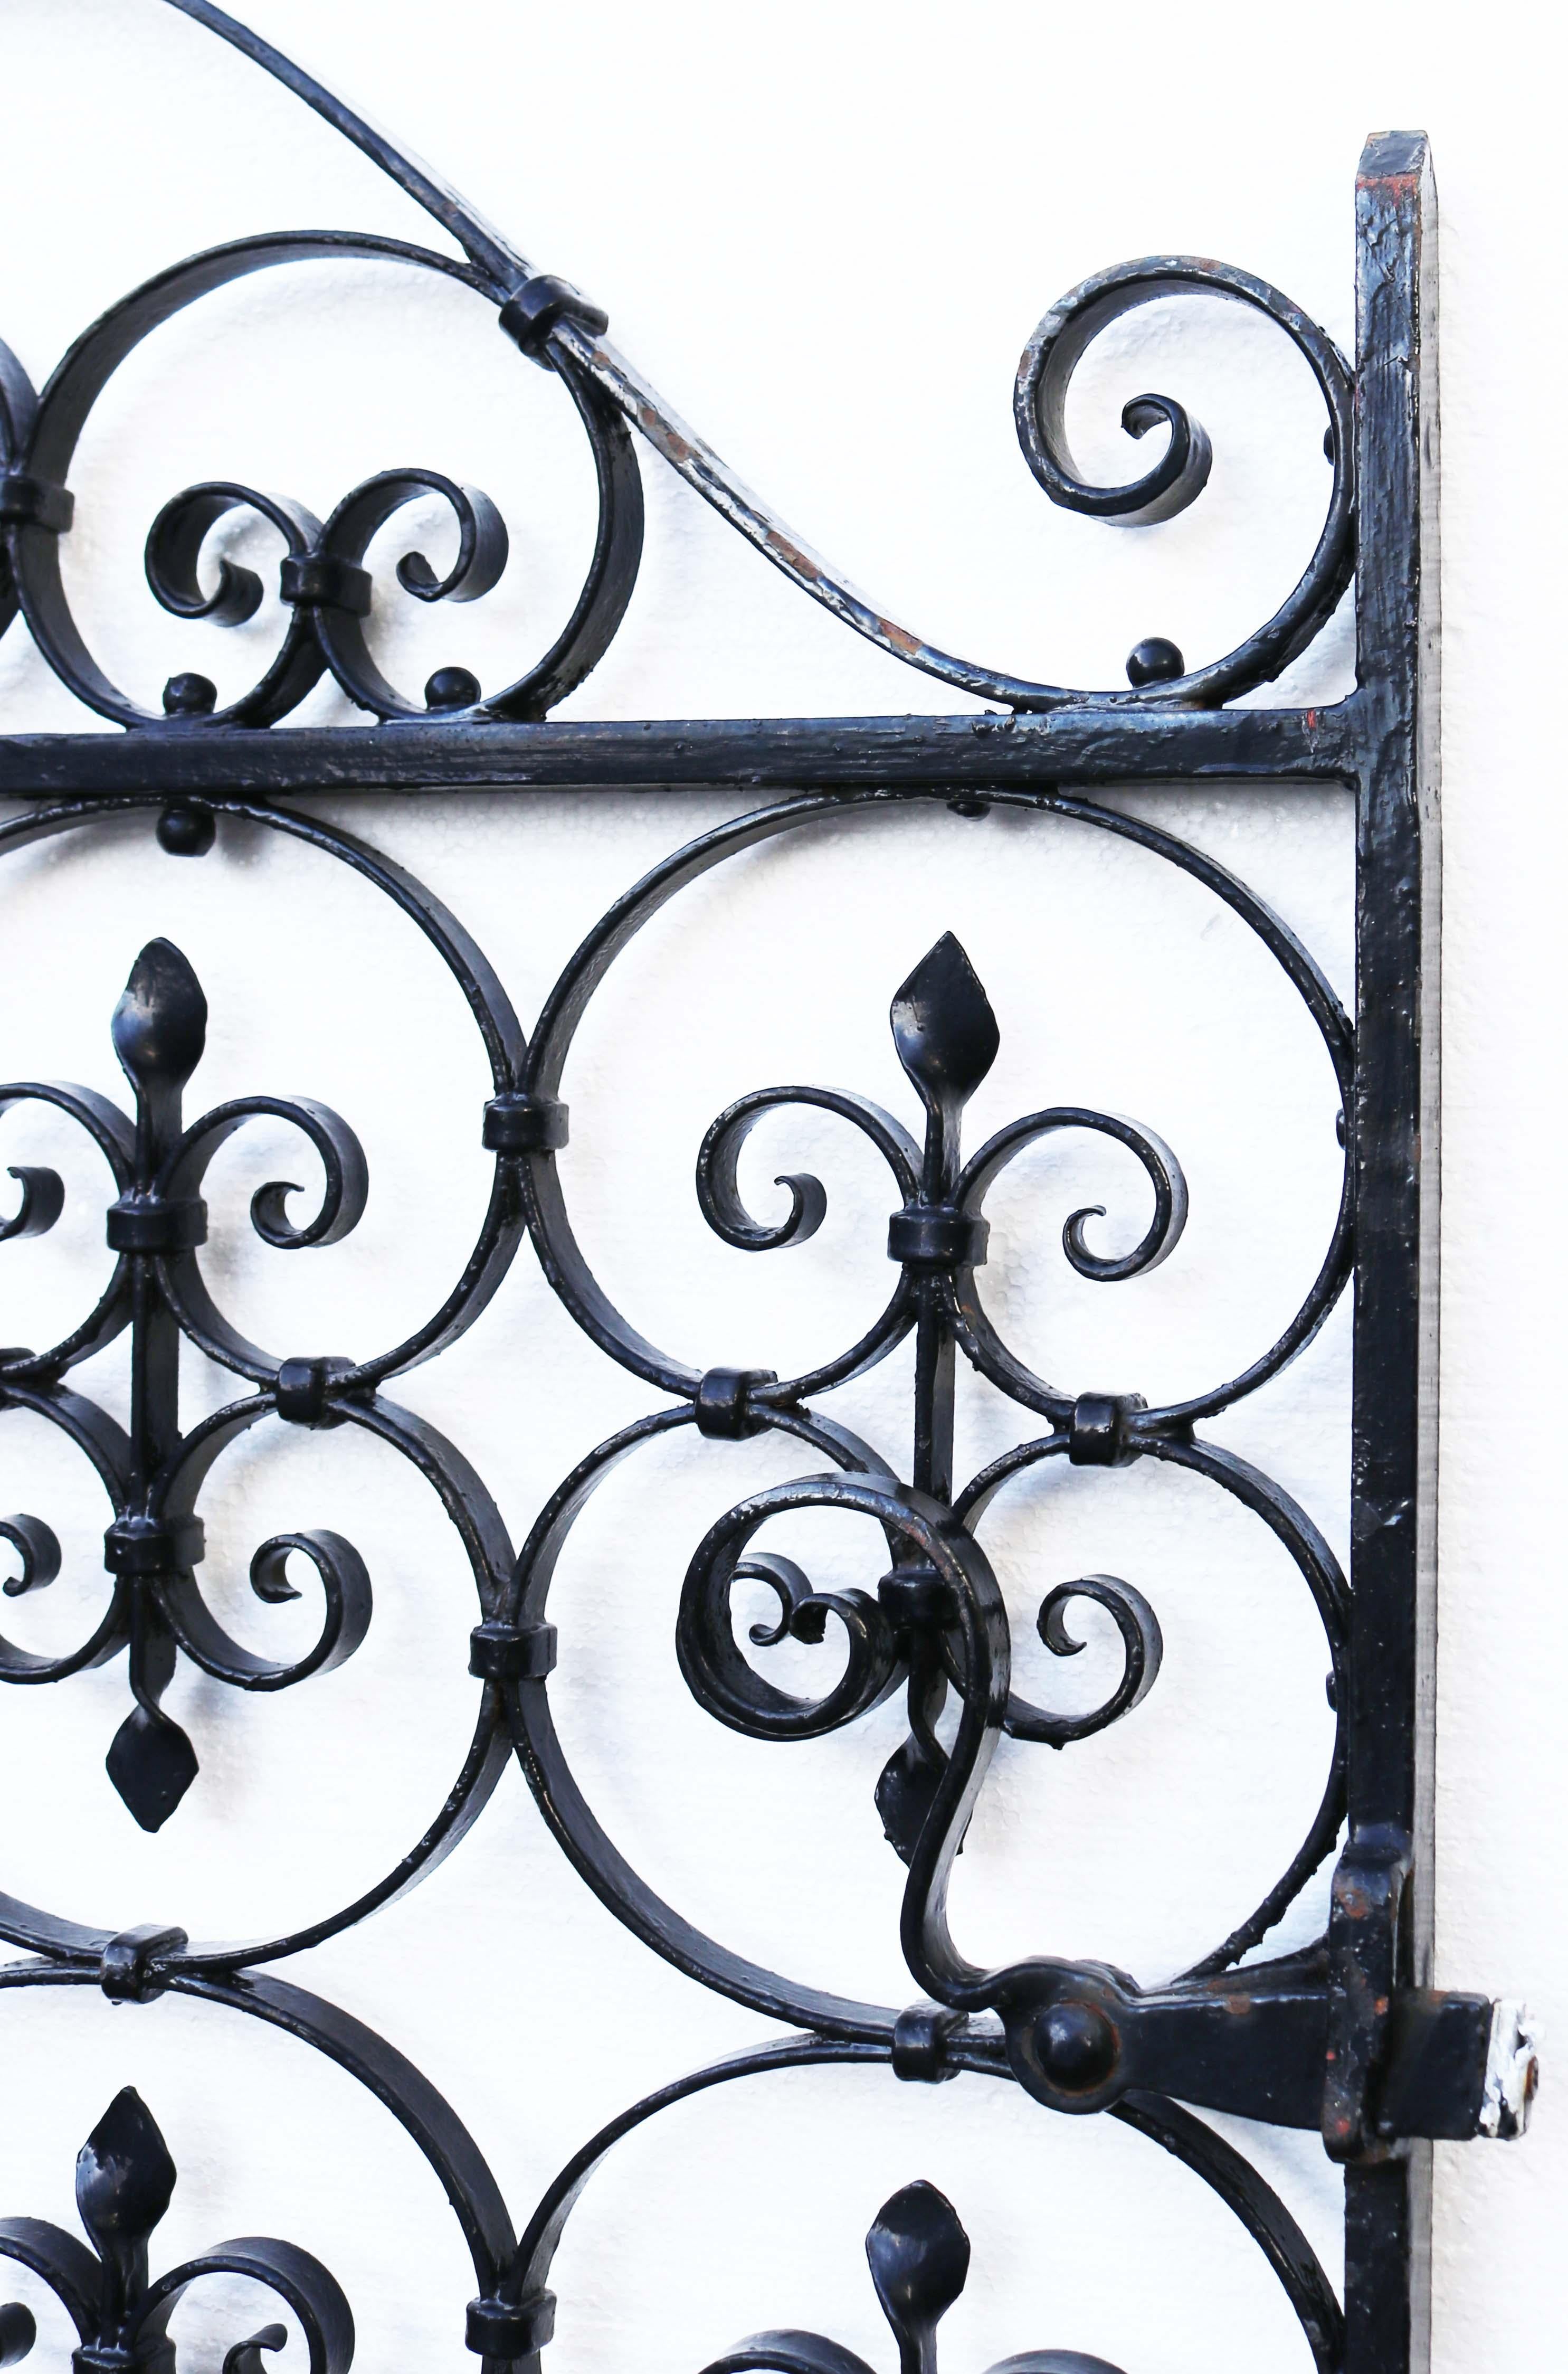 A good quality reclaimed wrought iron scroll-work gate, ready for installation.

Additional dimensions:

For an opening of approximately 100 cm.

 

 

Condition report

Good structural condition, Finished in old black paint. This gate